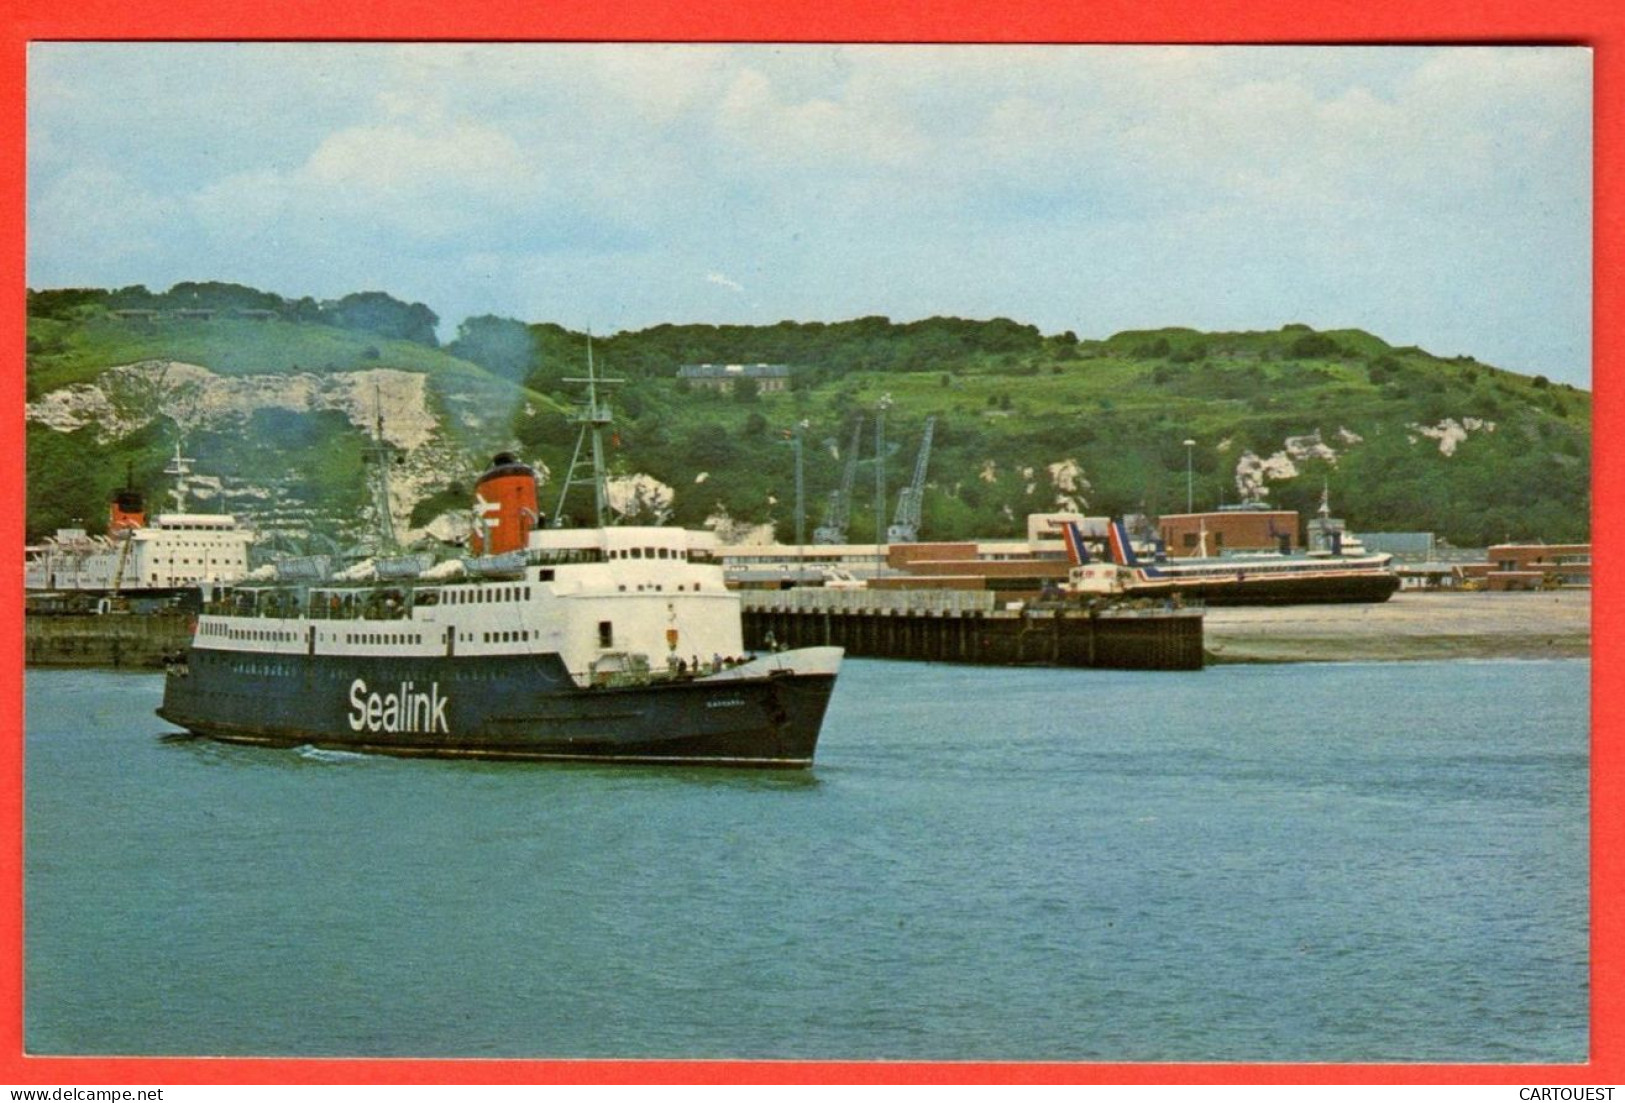 SEALINK FERRY Leaving Dover Harbour - Dover